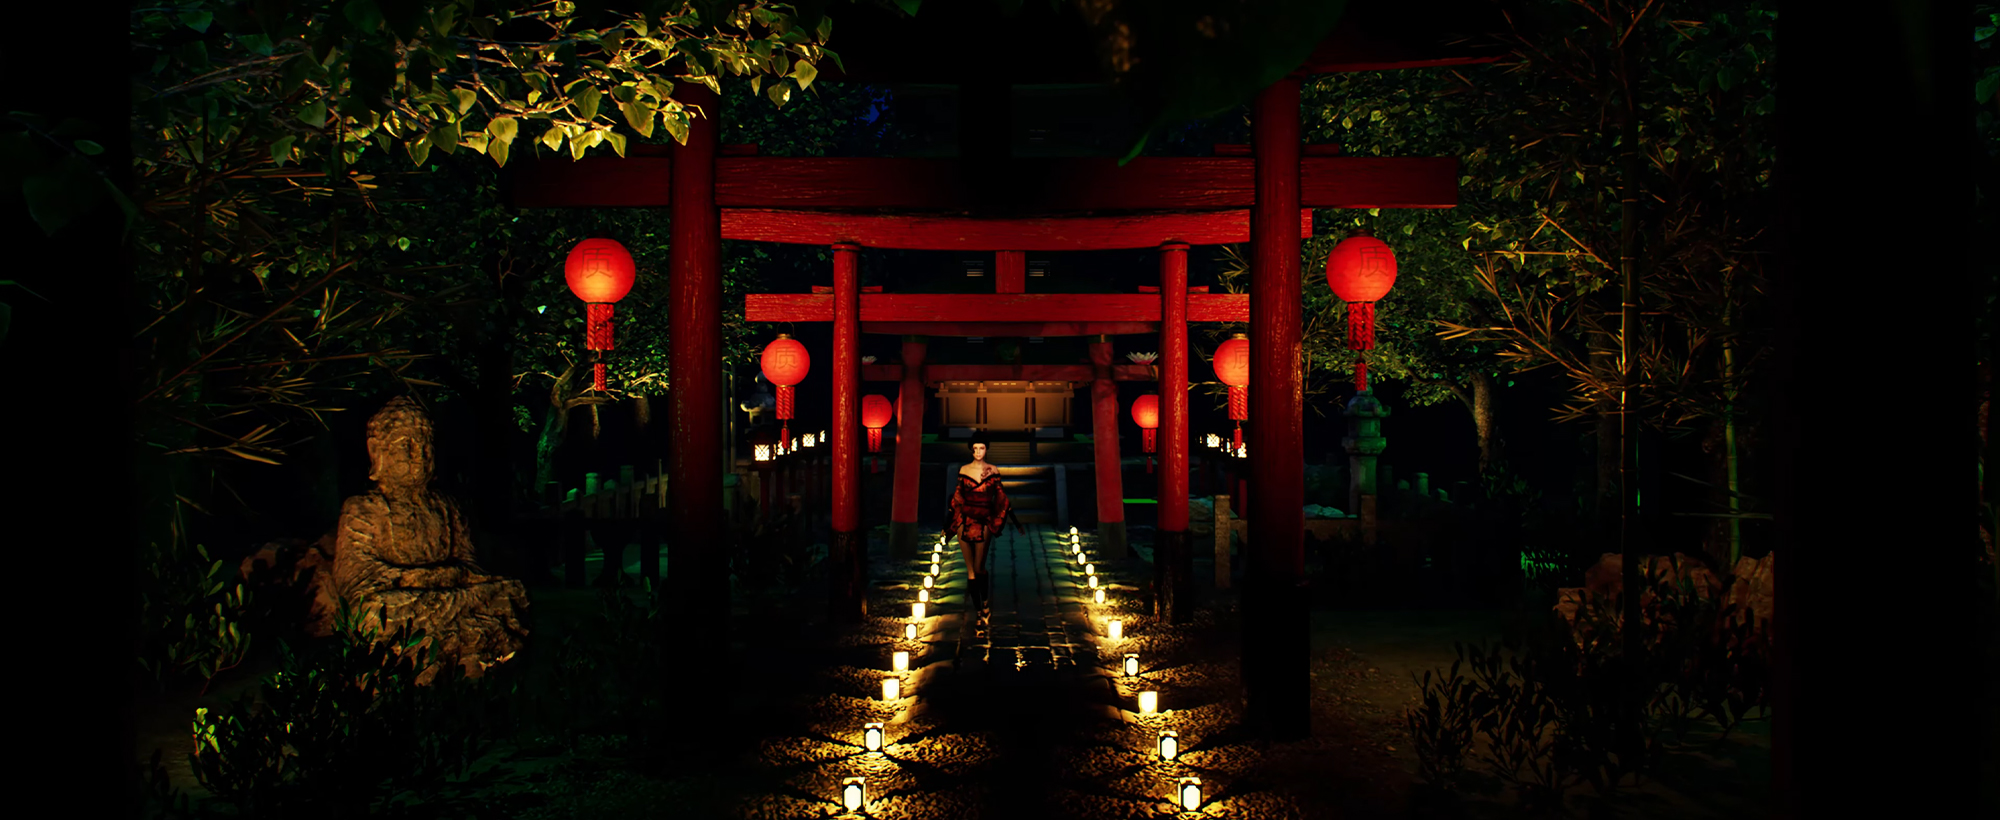 A character in a black and red dress in a night time oriental setting walking towards the viewer.